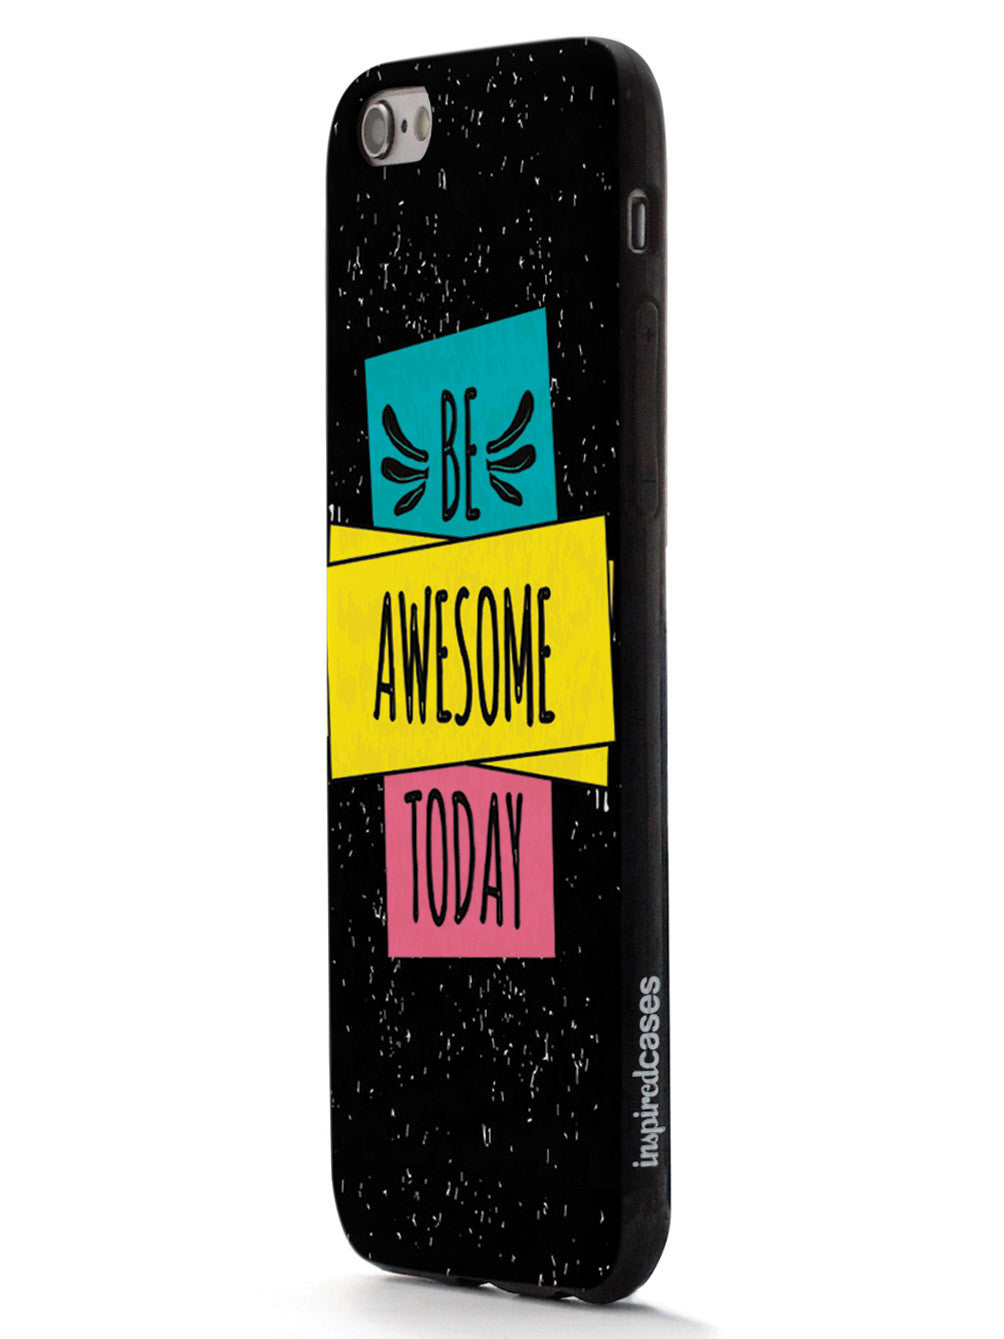 Be Awesome Today - Black Case